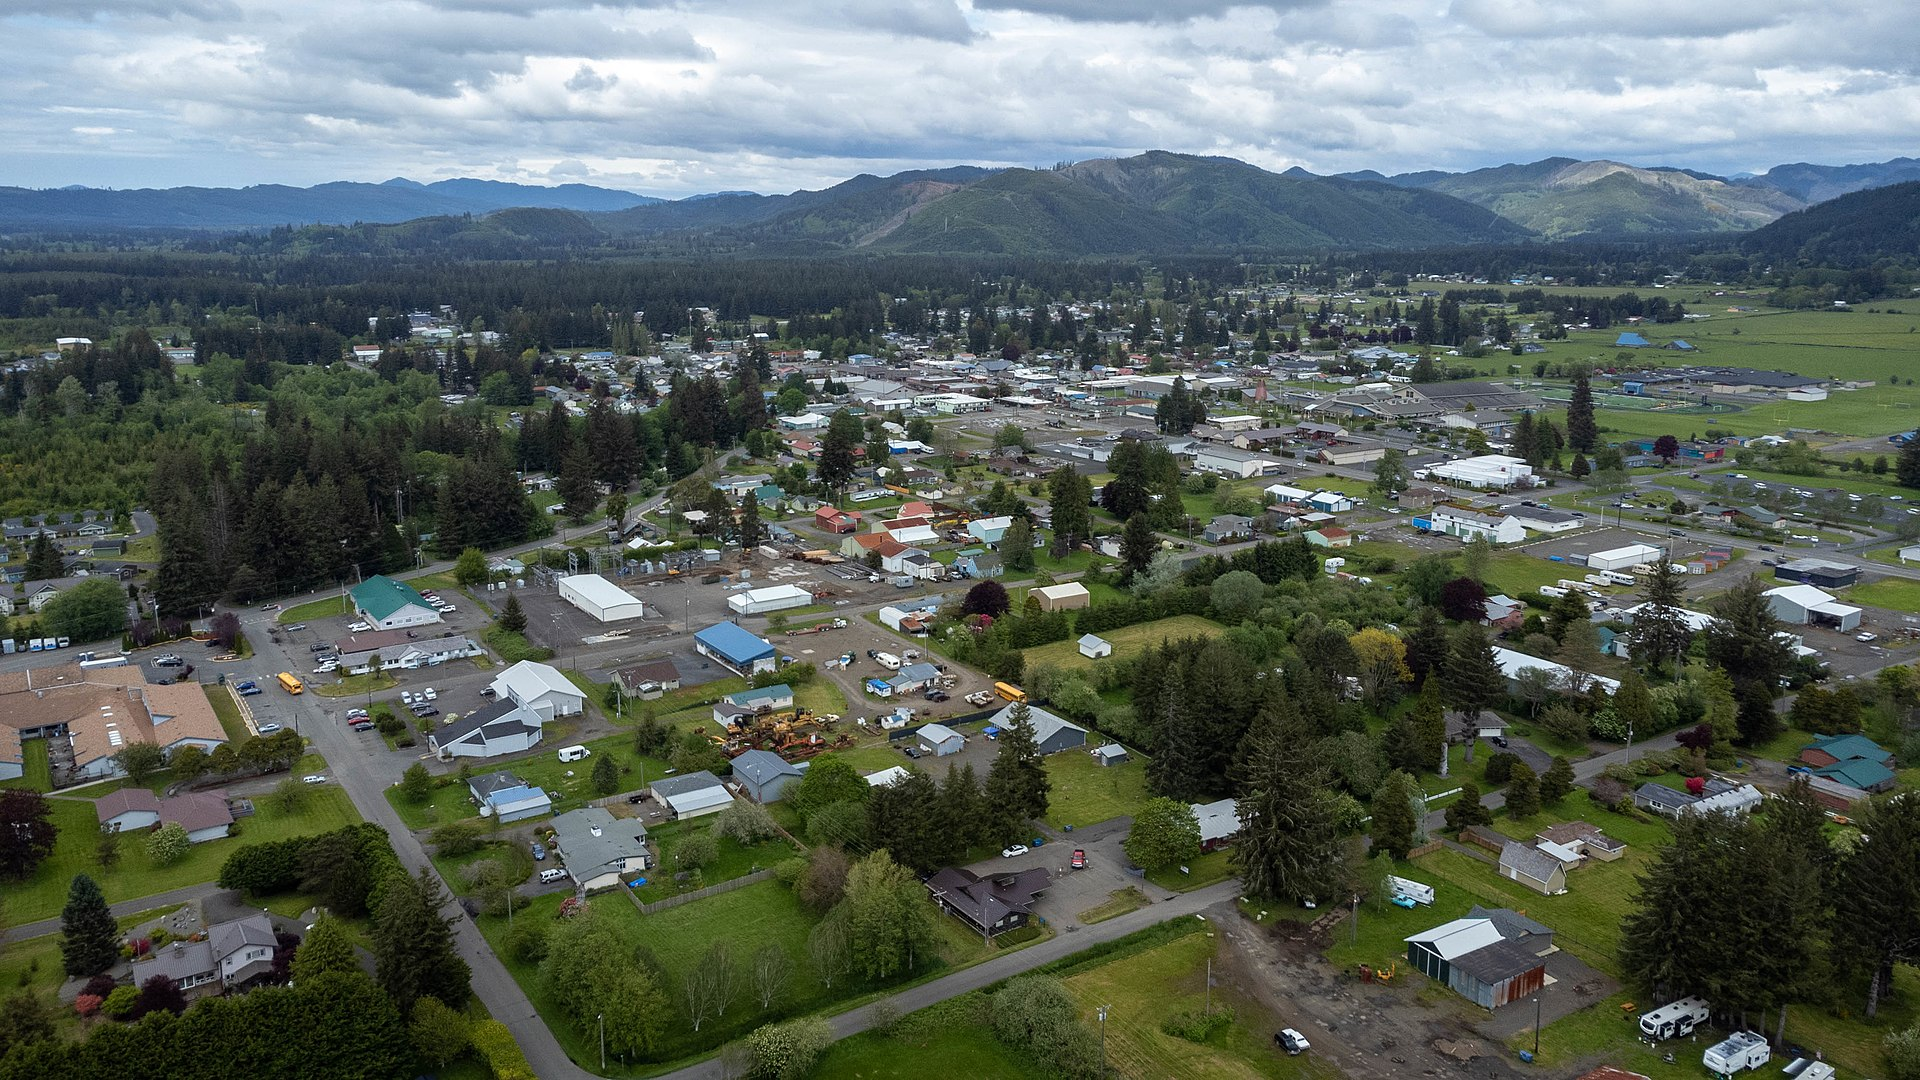 rural town with streets in a grid, surrounded by farmland and low mountains